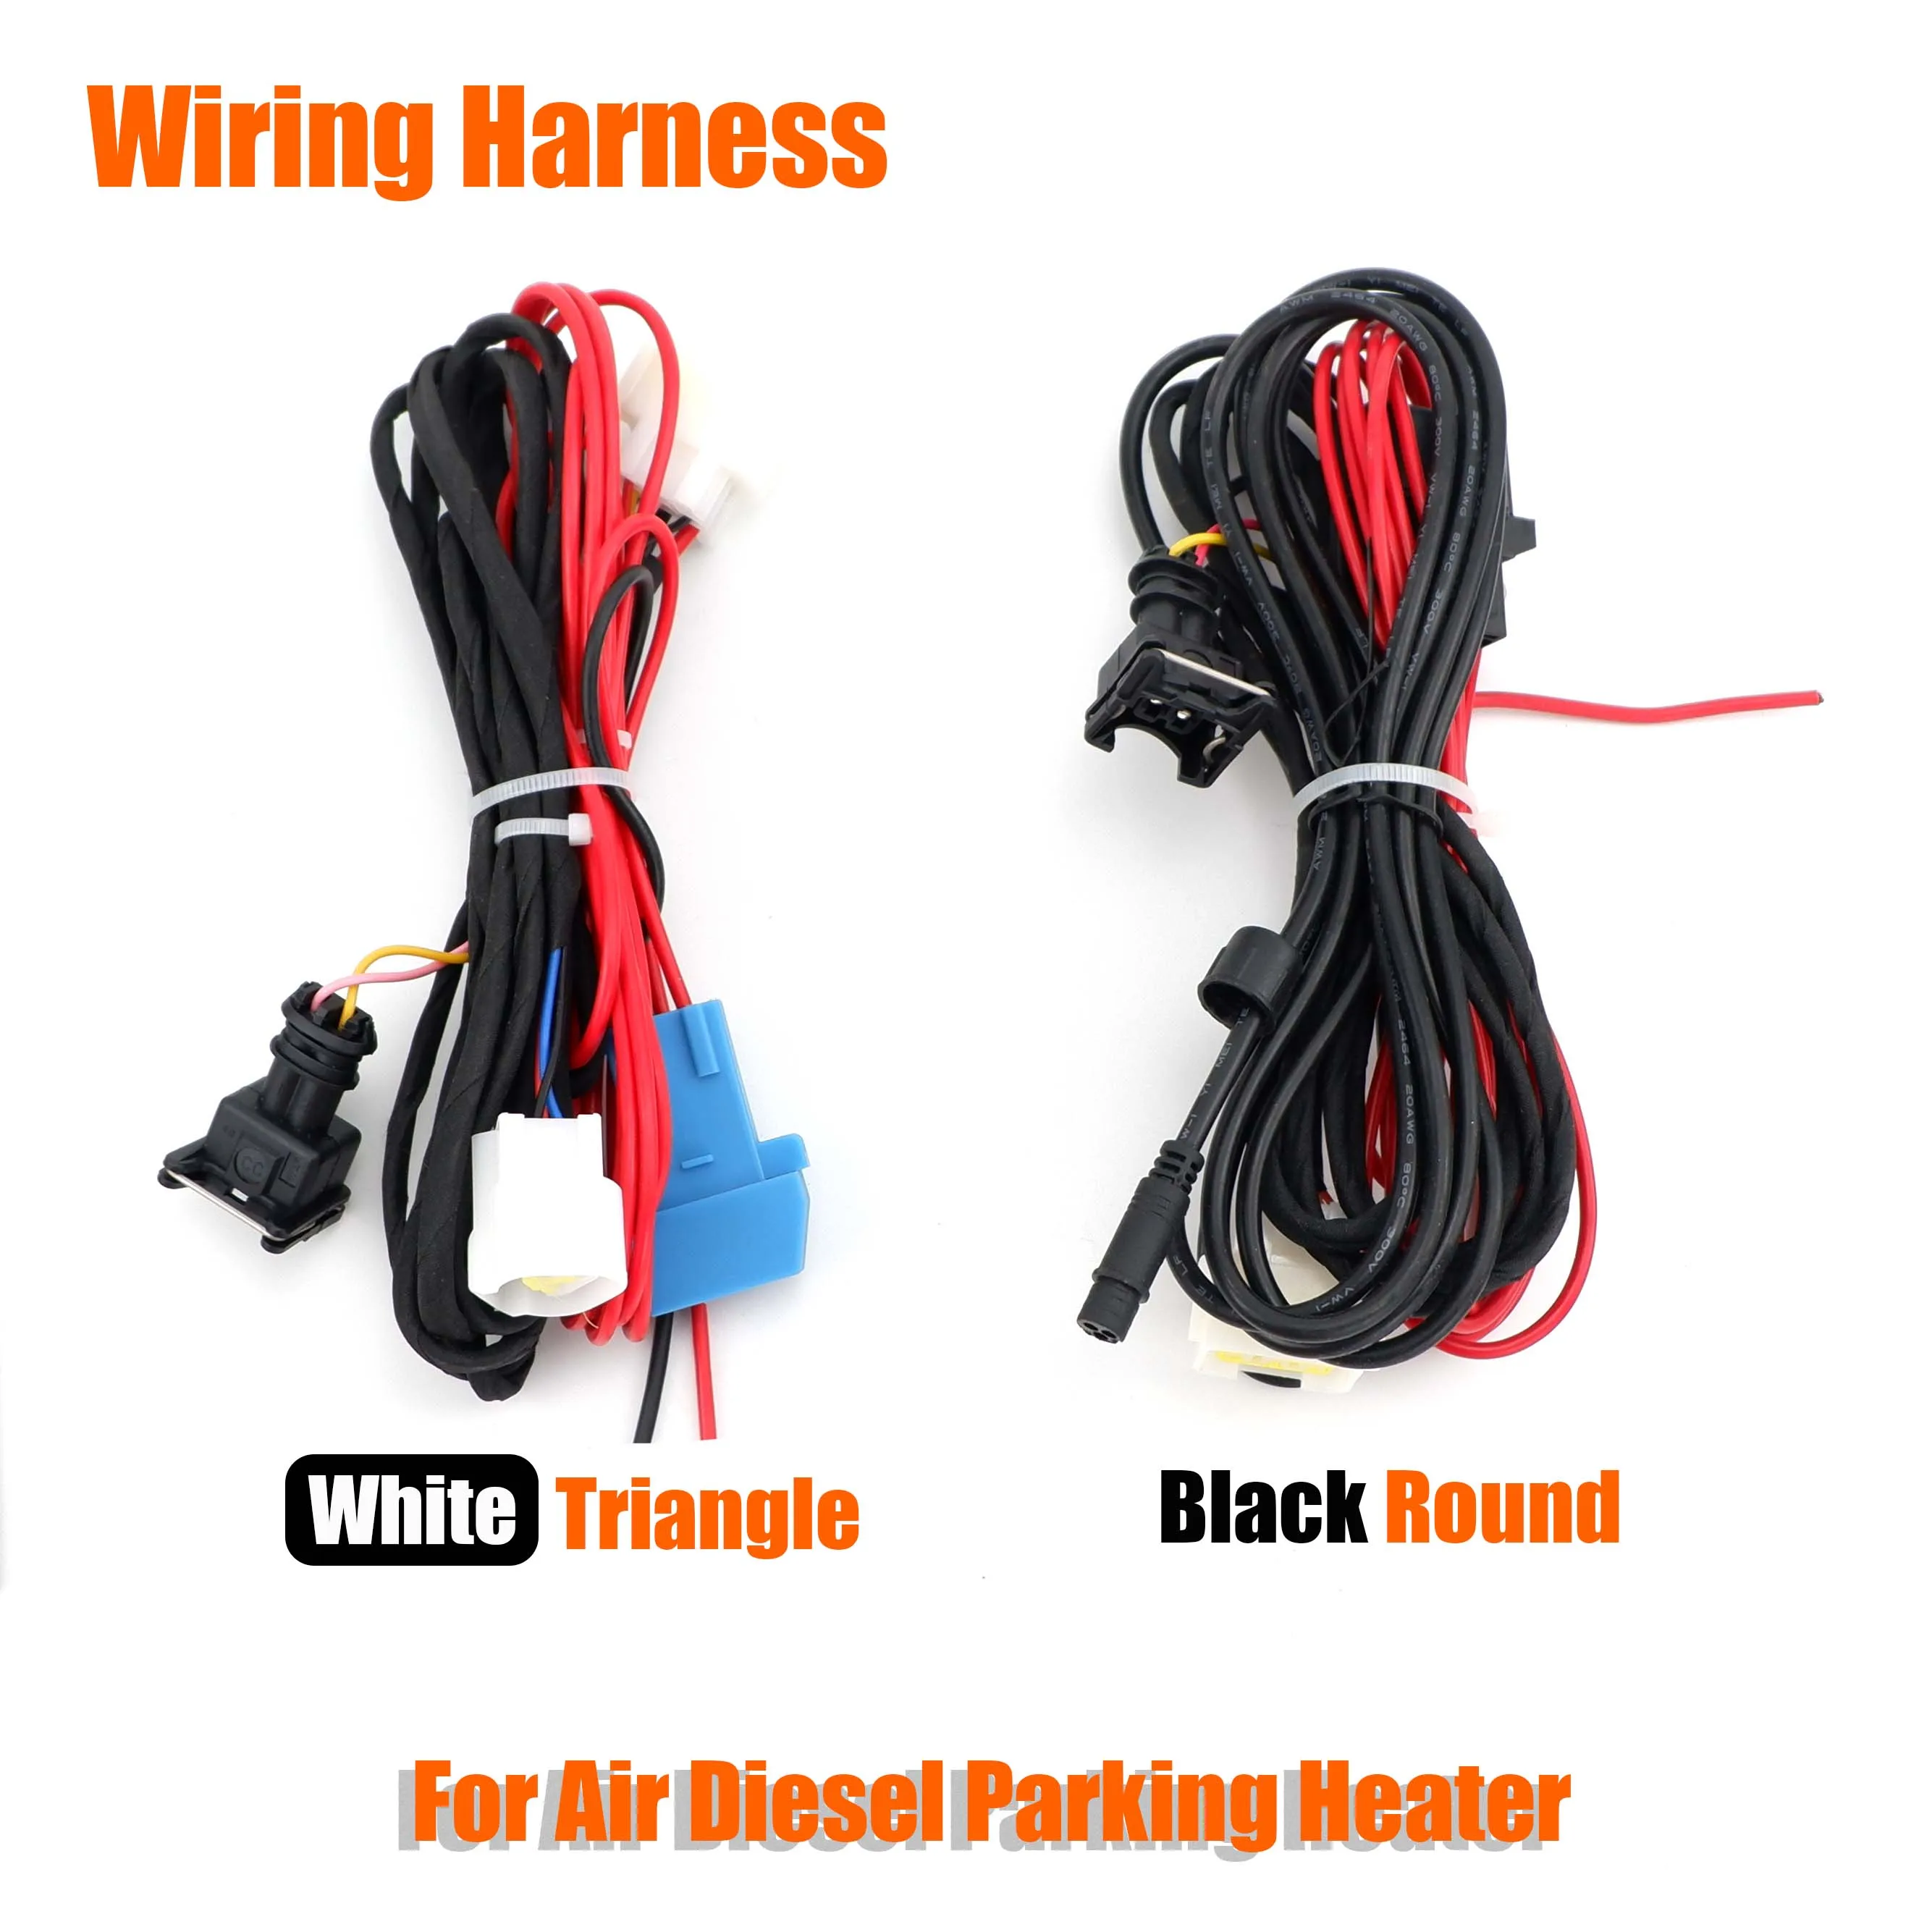 12V / 24V Air Diesel Heater Wiring Harness Loom Power Supply Cable Adapter Round / Triangel For Eberspacher Webasto